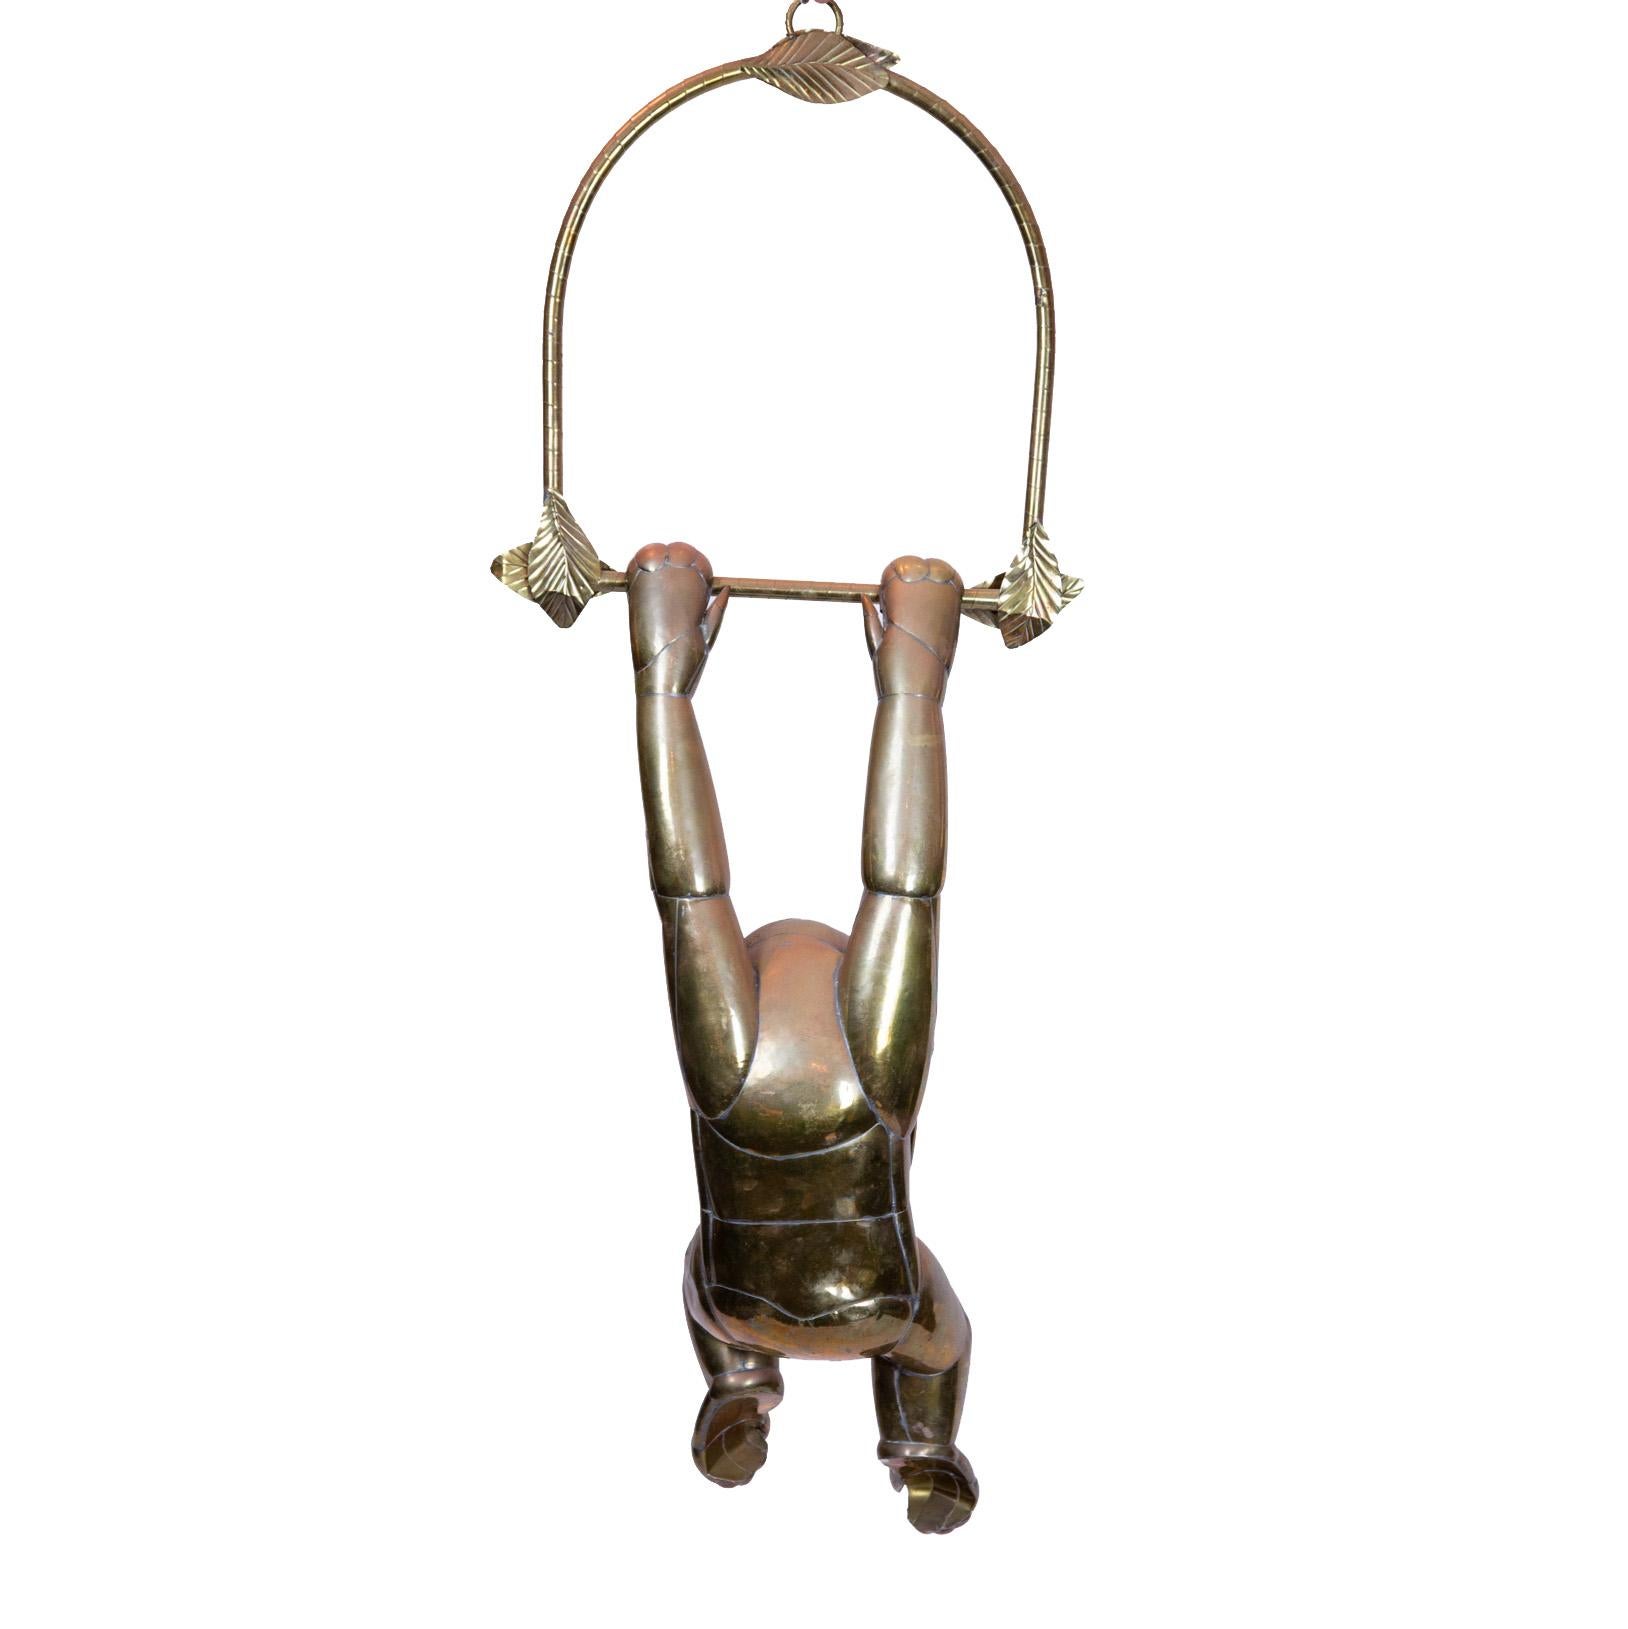 Bustamante hanging brass monkey with baseball CAP. Large scale brass monkey by Sergio Bustamante, circa early 1970s. This whimsical yet detailed example hangs effortlessly from its brass branch with leaf details.